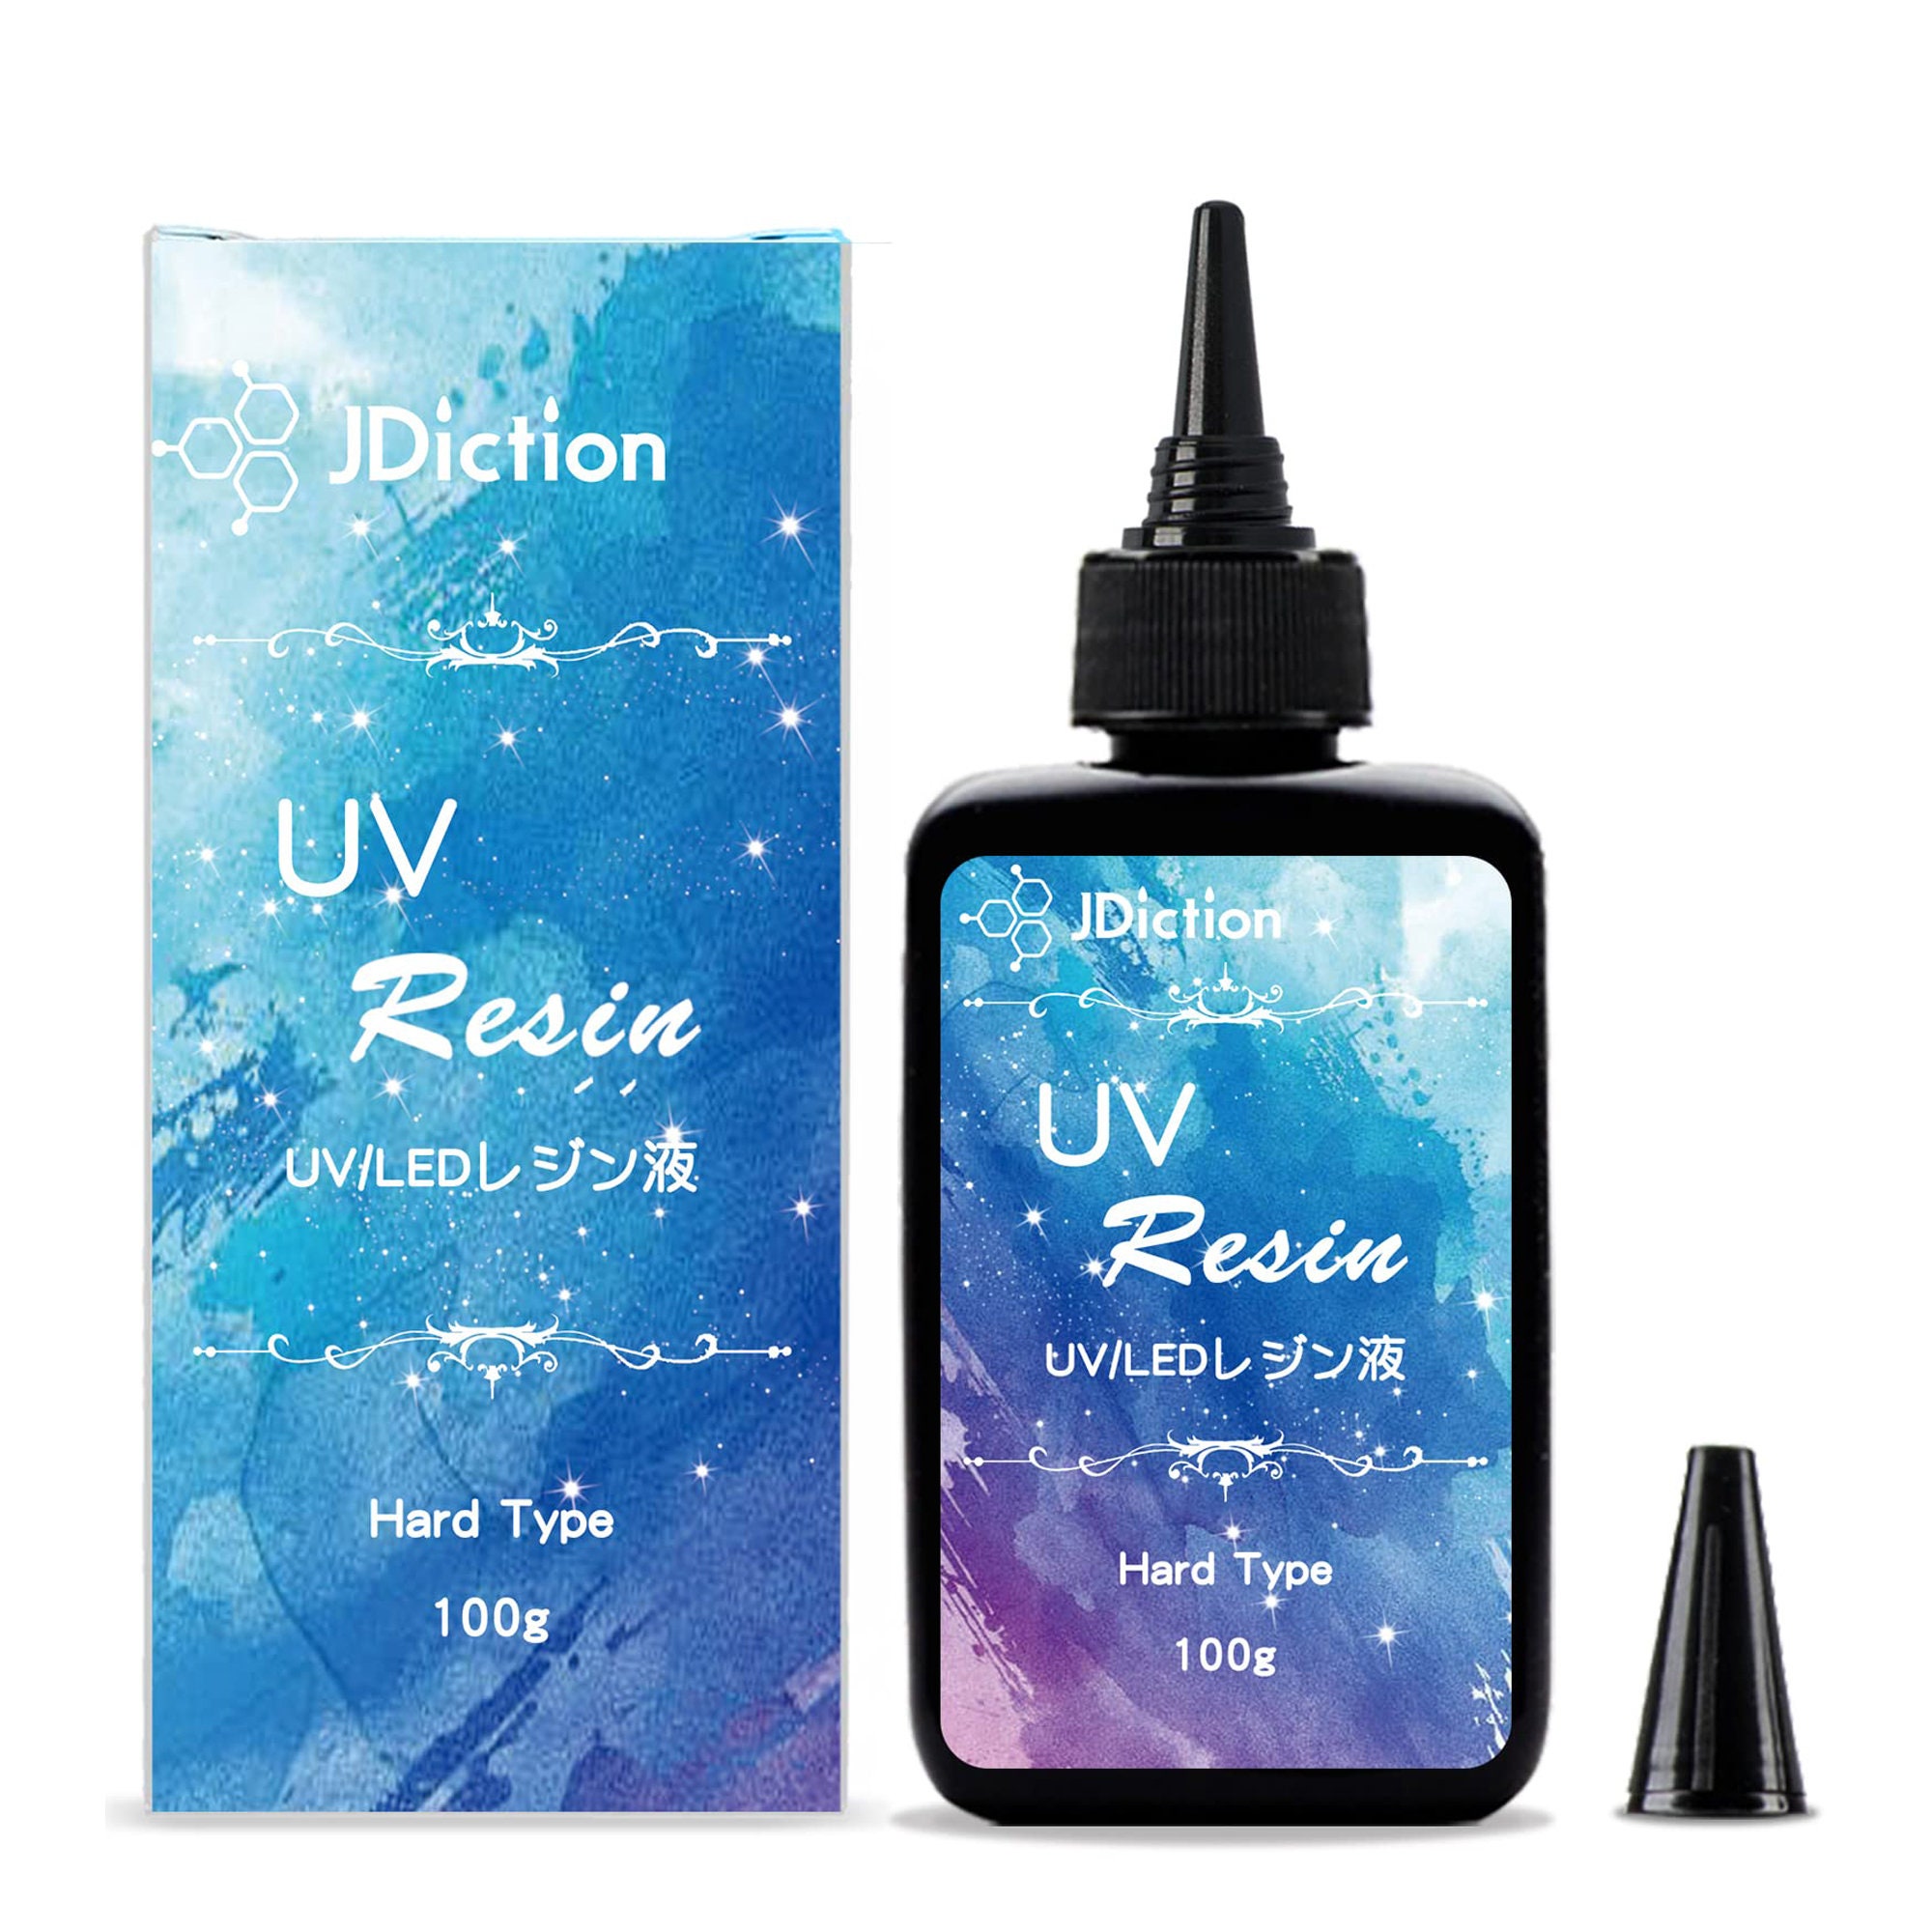 JDiction UV Resin Kit 200g Clear Hard UV Glue Fast Curing for  Crafts/Jewelry/Casting & Coating 